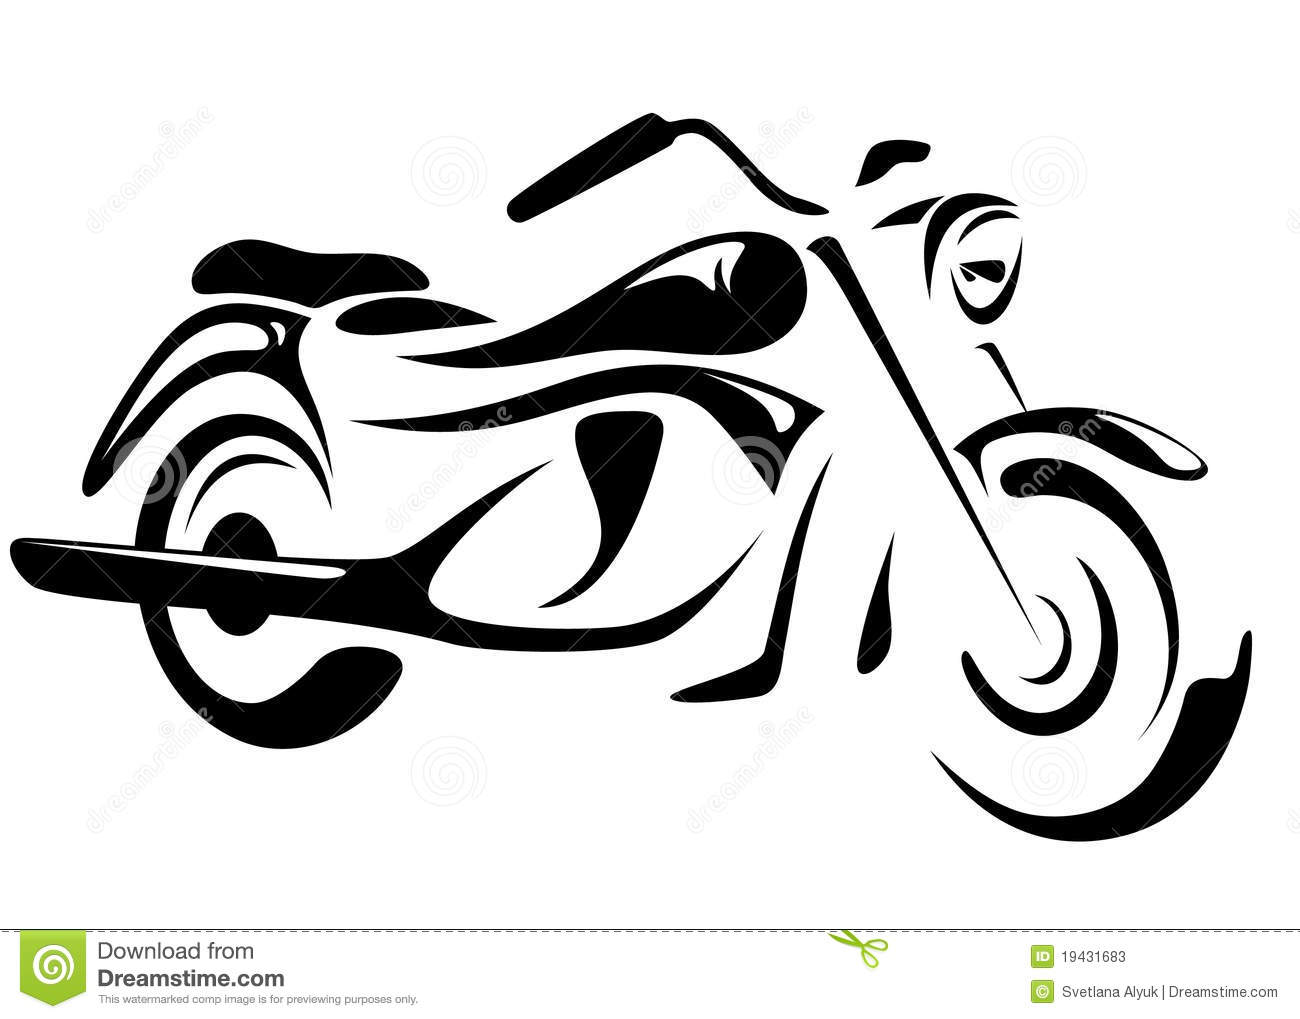 Motorcycle Clip Art Black and White